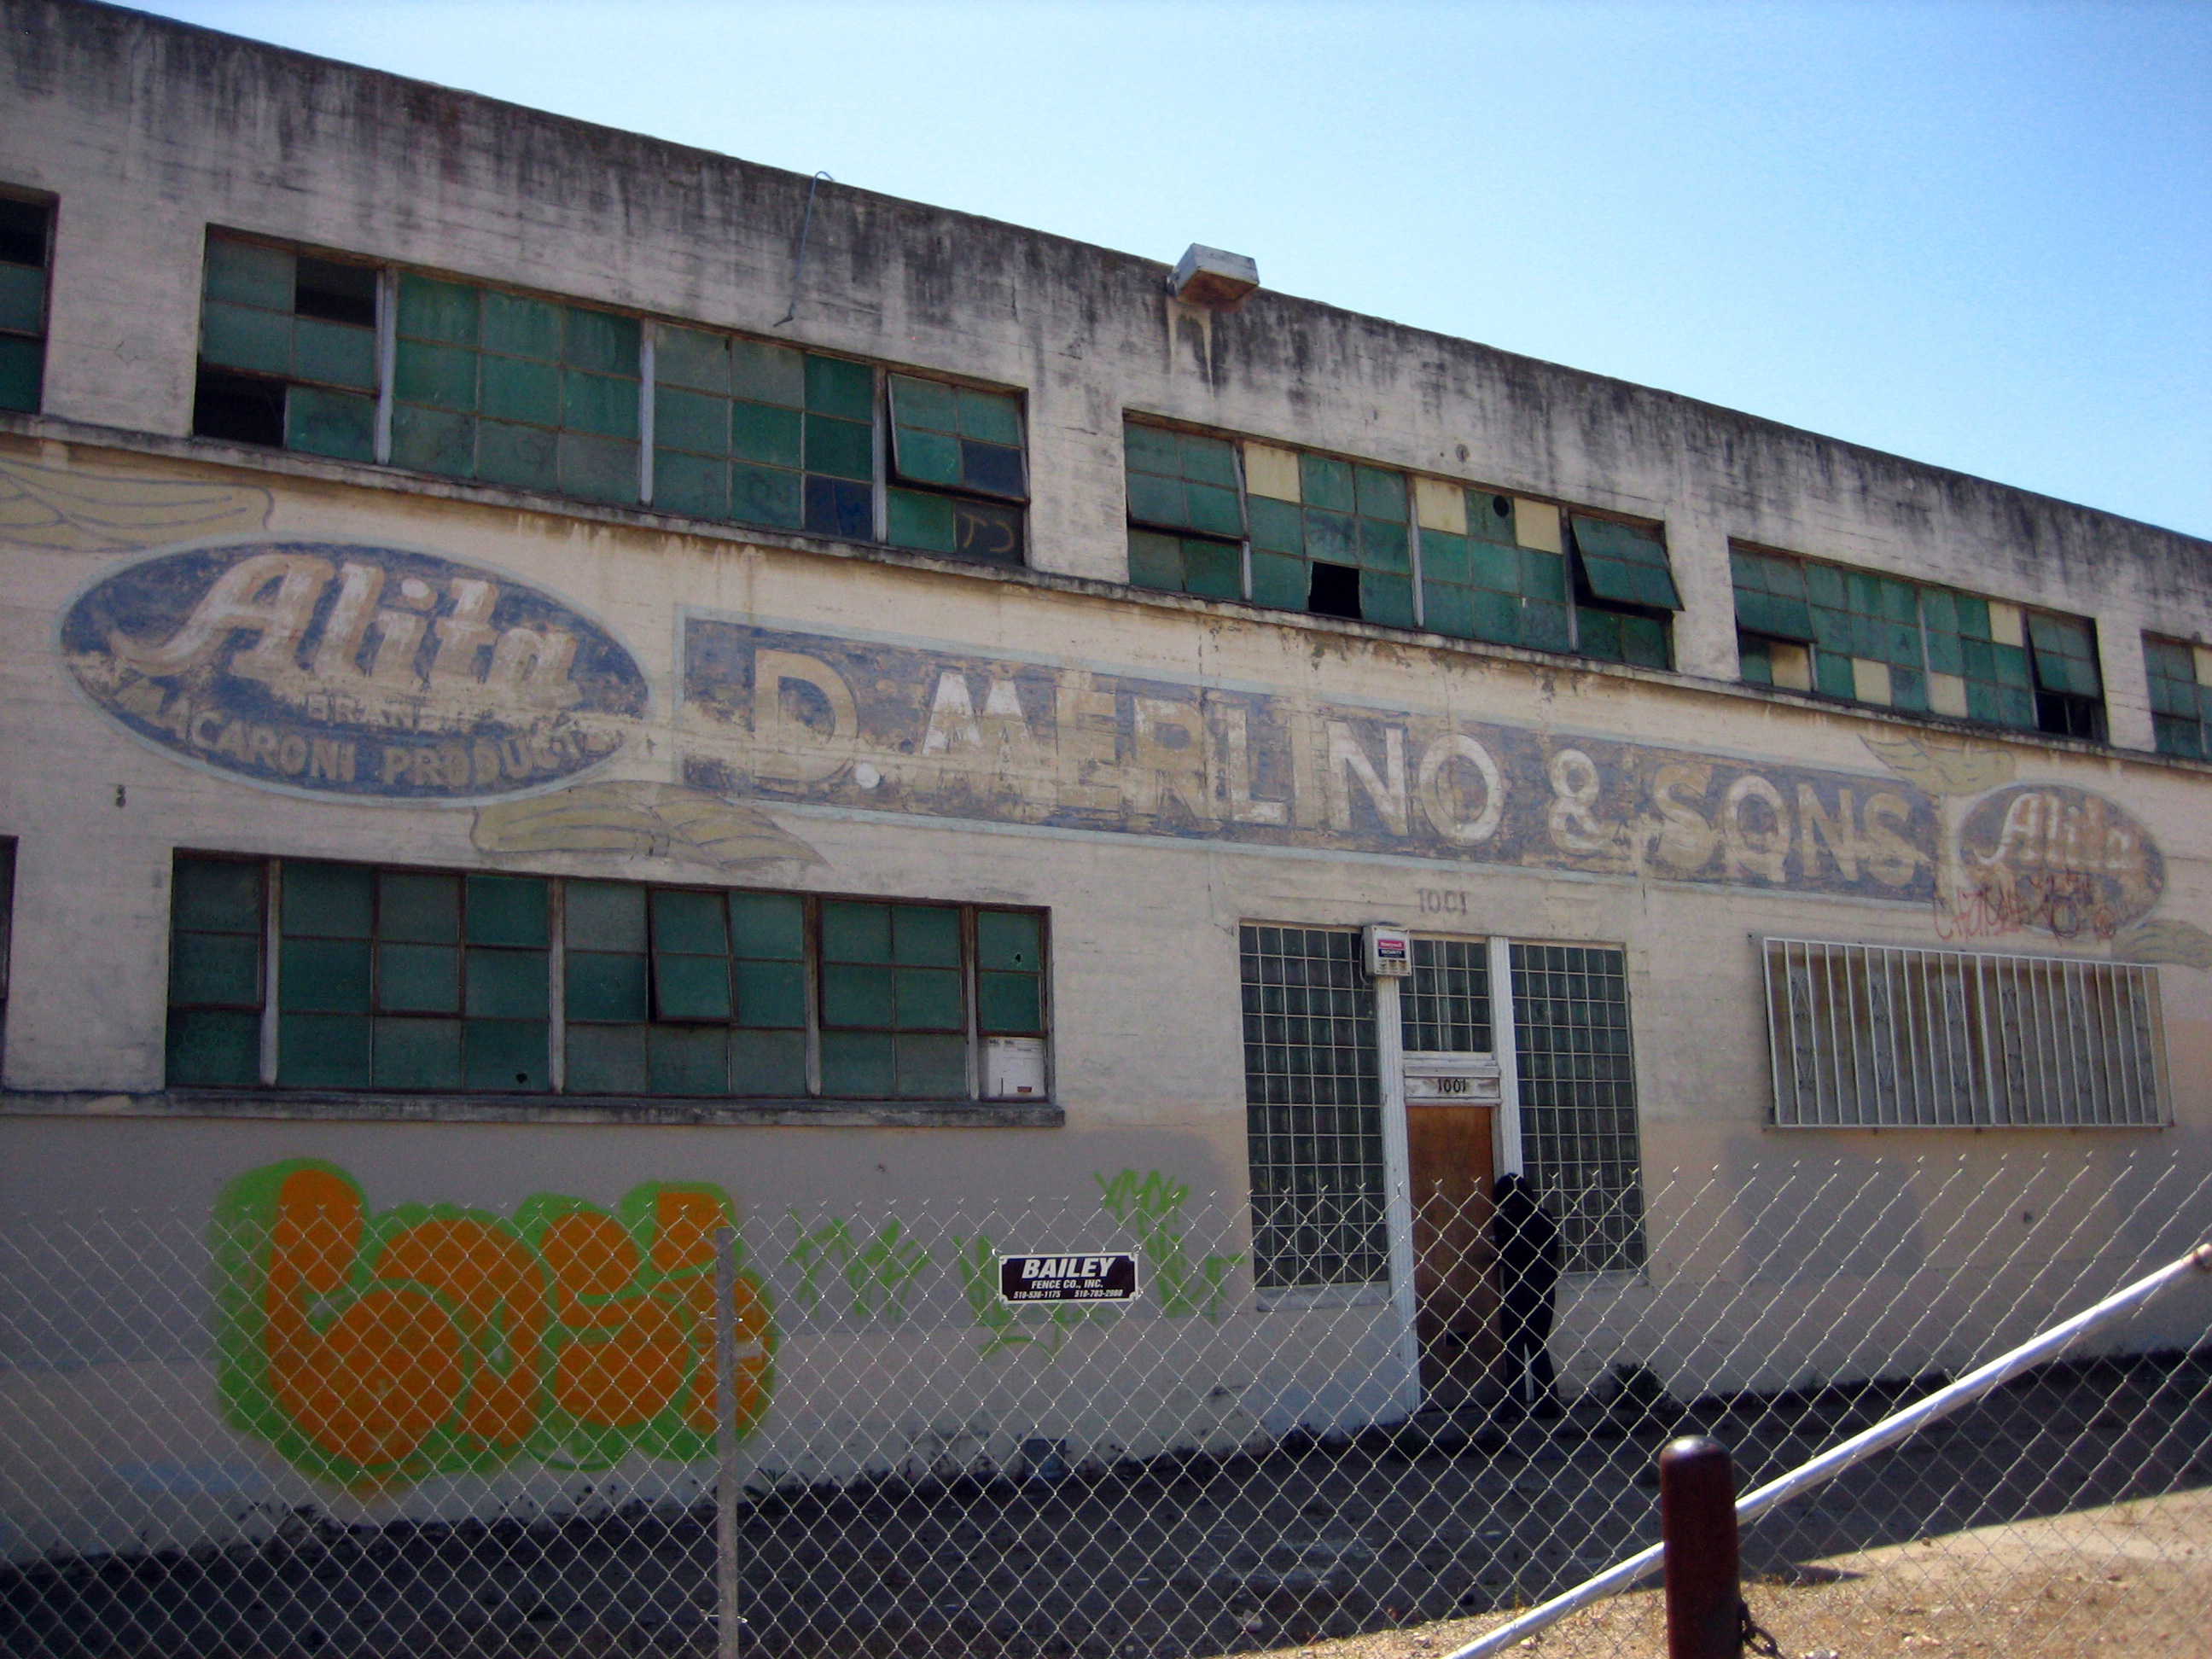 Exterior of the degraded pasta factory building before renovation at Tassafaronga Village in East Oakland, CA.